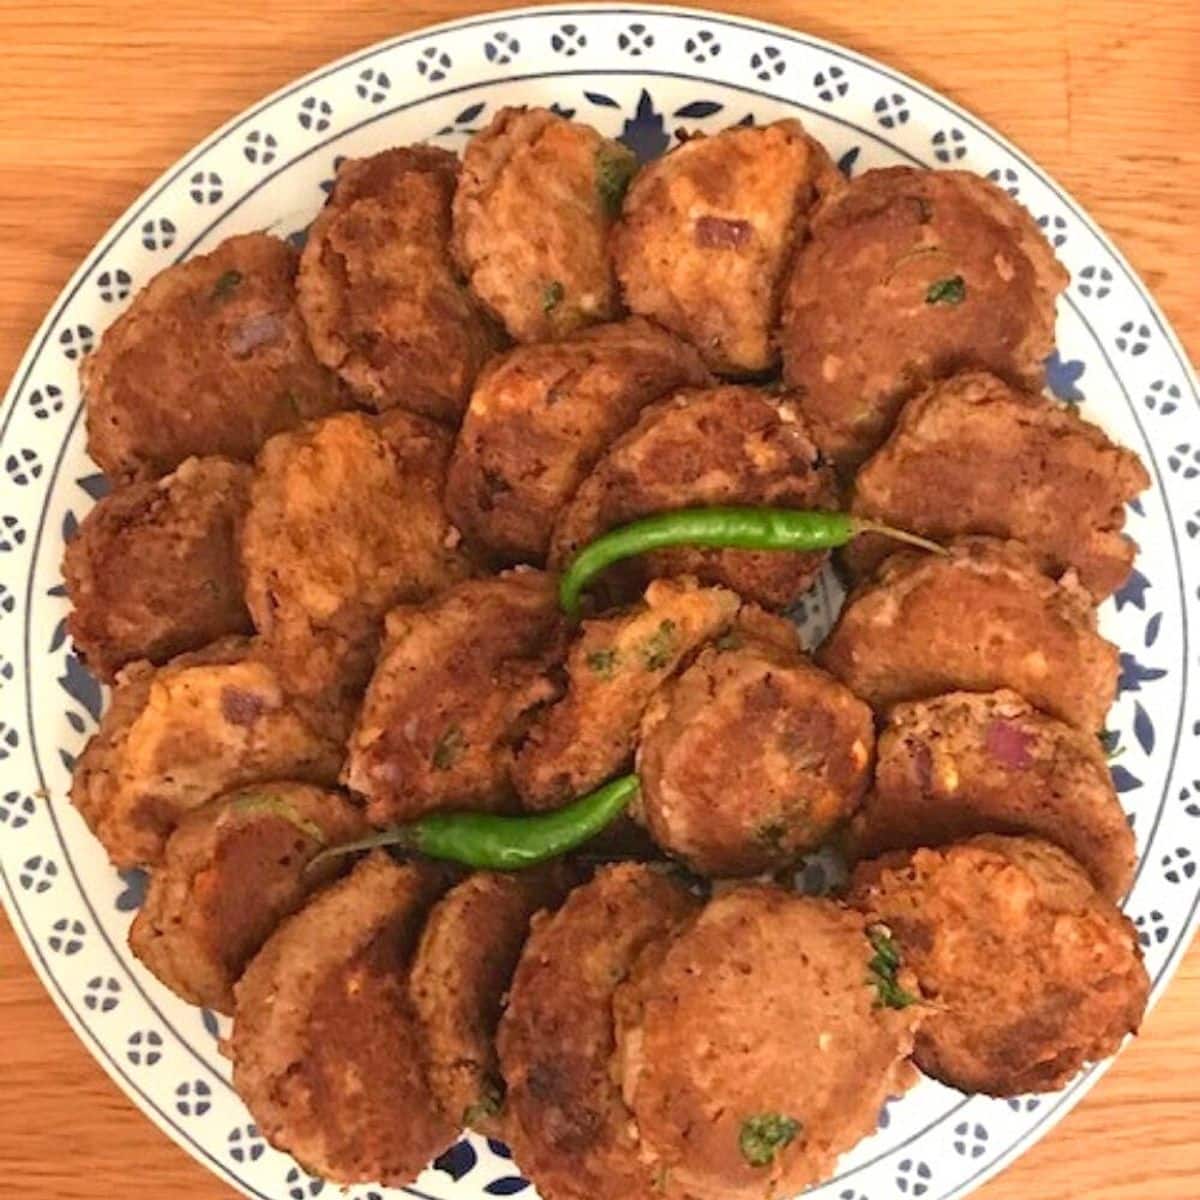 Plate of shami kebabs on round plate